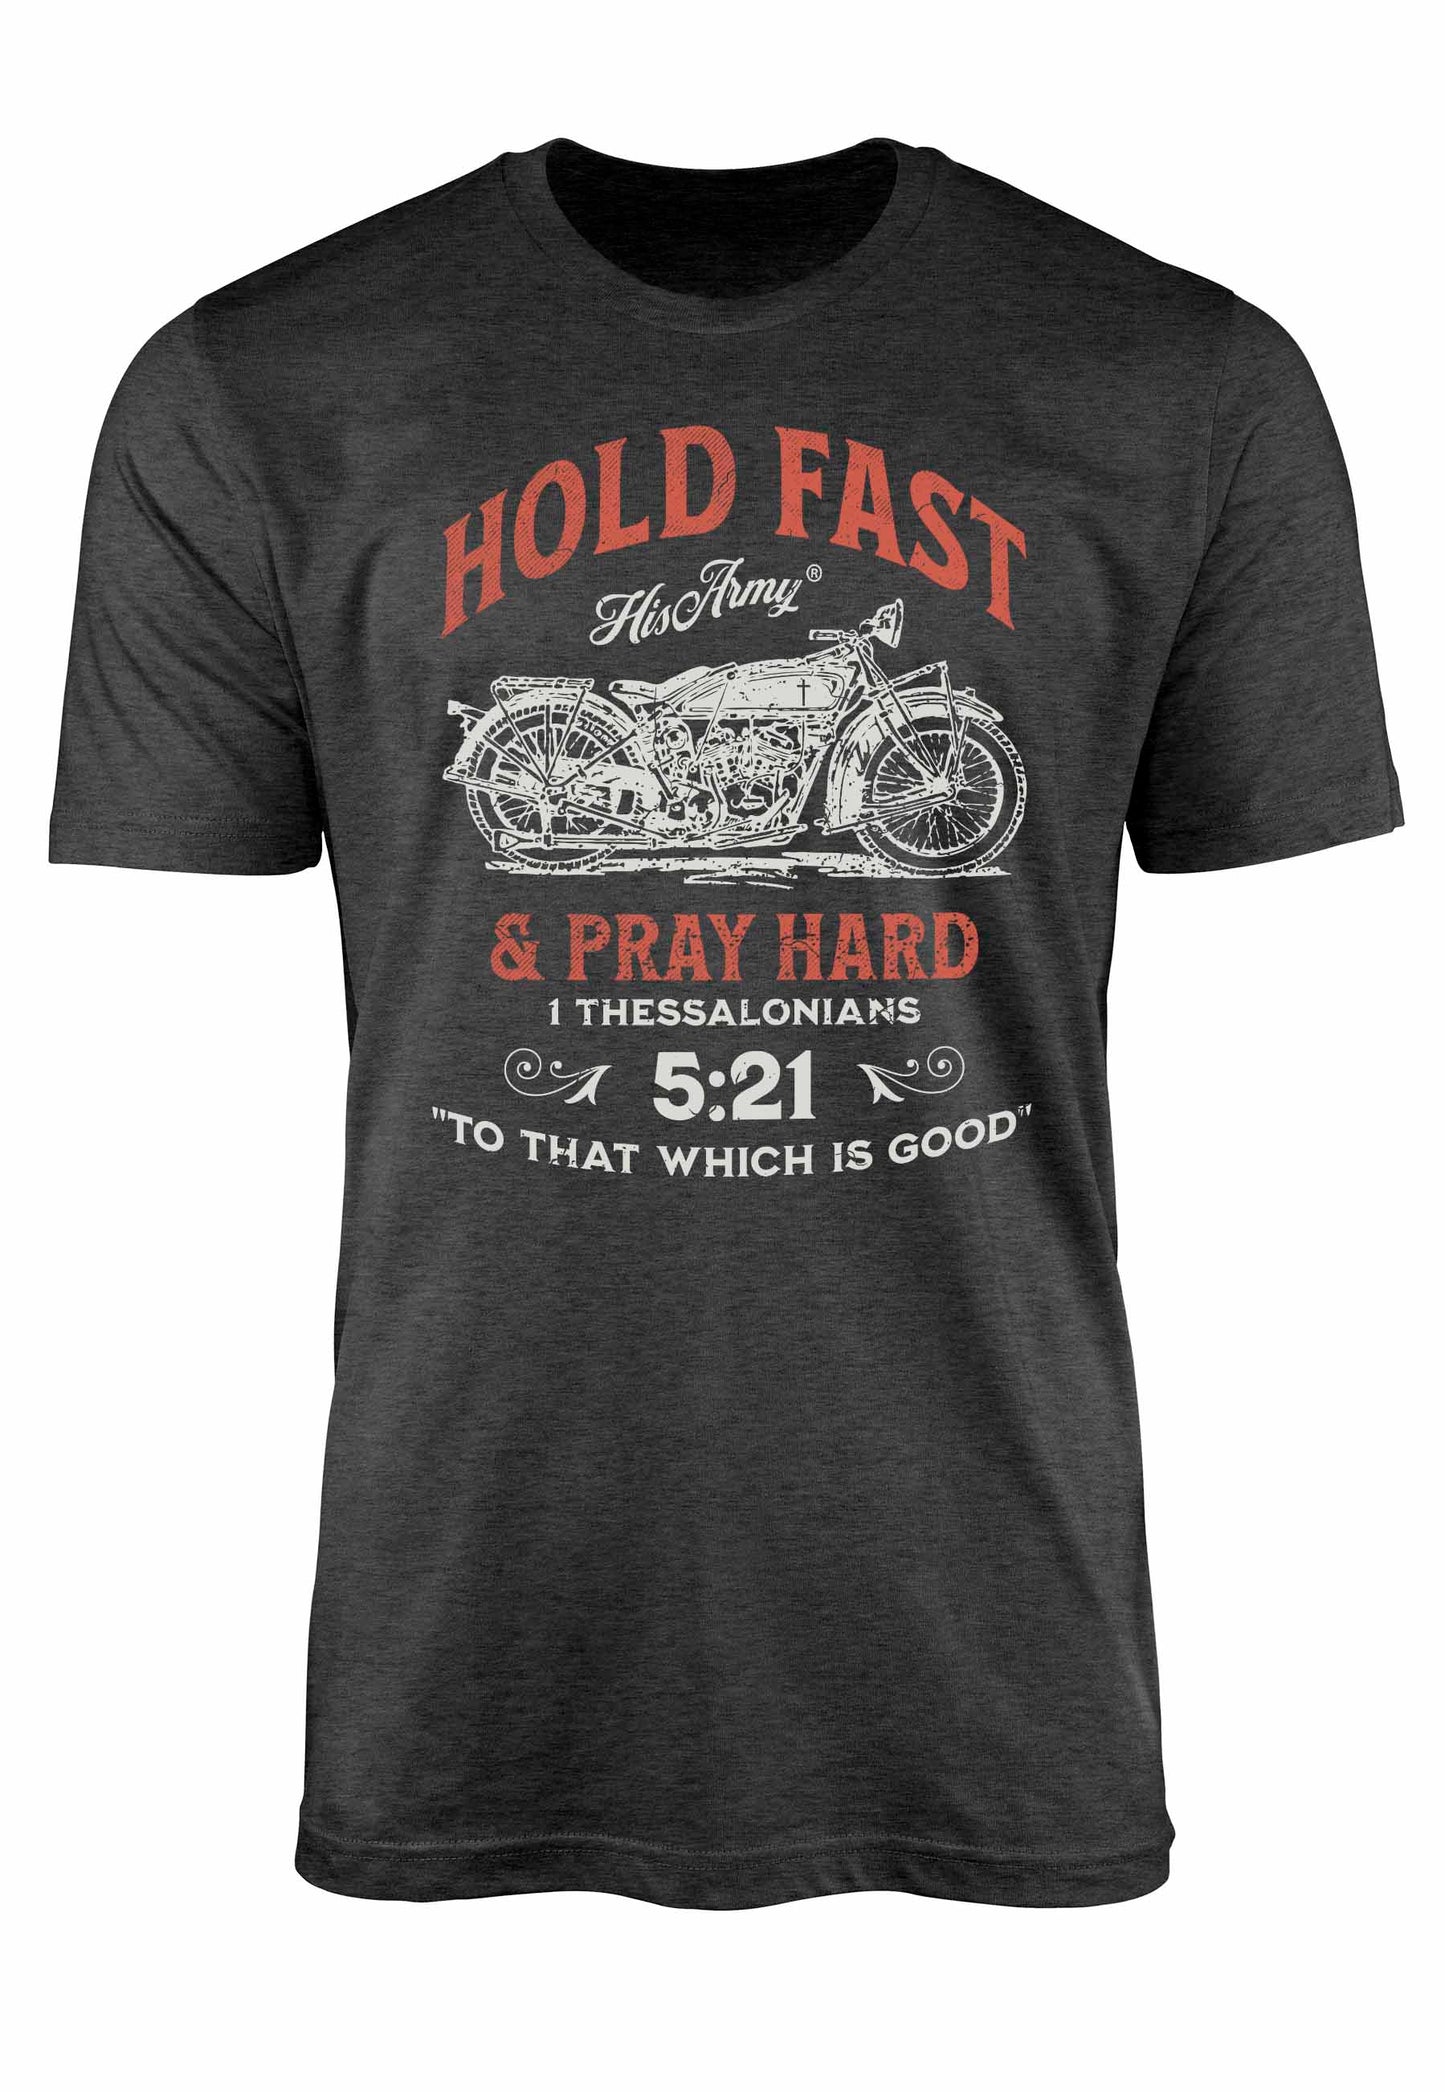 Hold  Fast Christian t-shirt with motorcycle and 1 Thessalonians 5:21